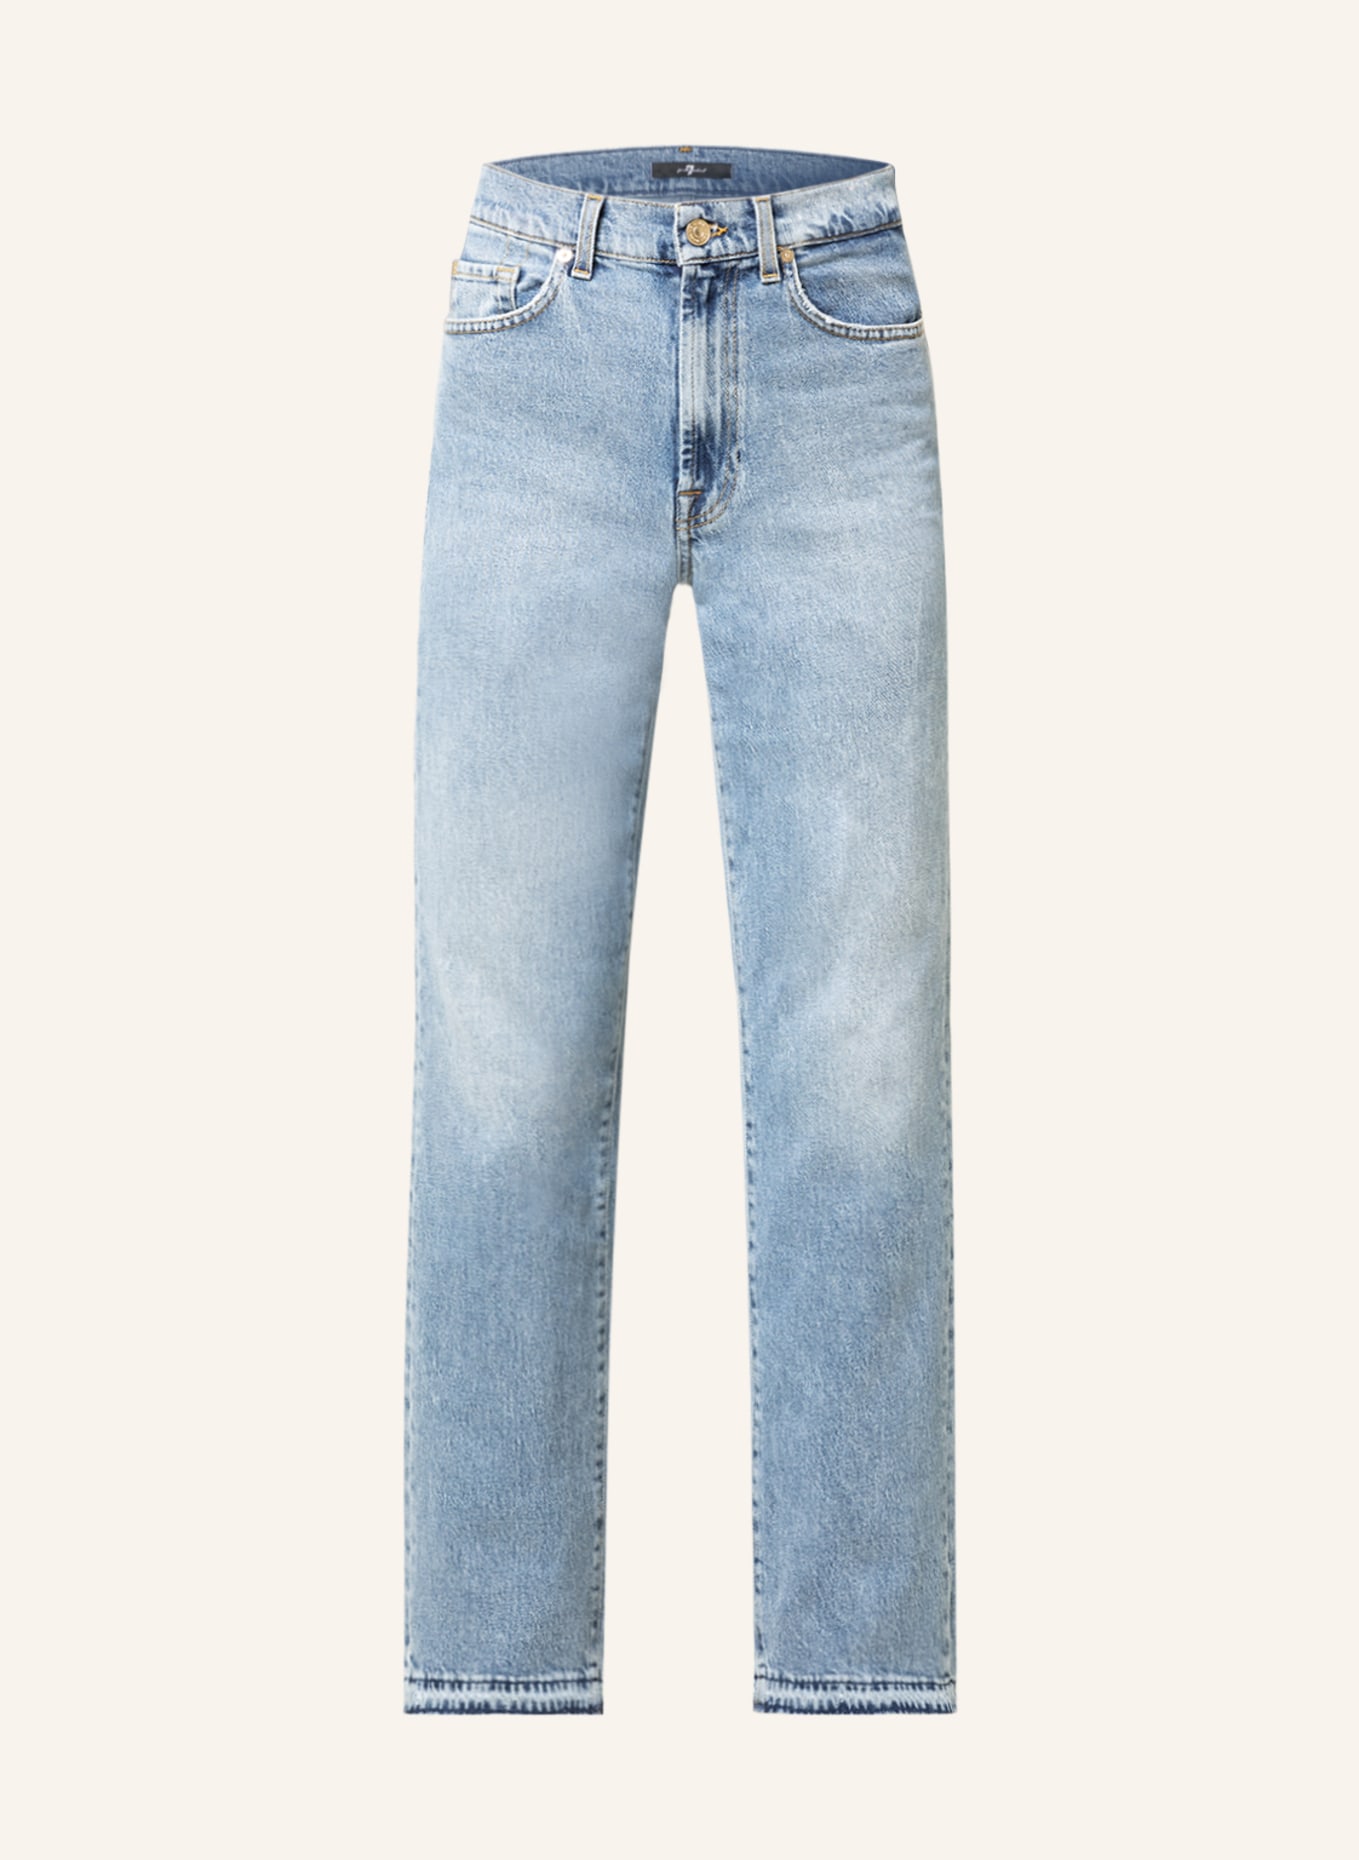 7 for all mankind Straight Jeans TALL LOGAN STOVEPIPE, Farbe: HI MID BLUE(Bild null)